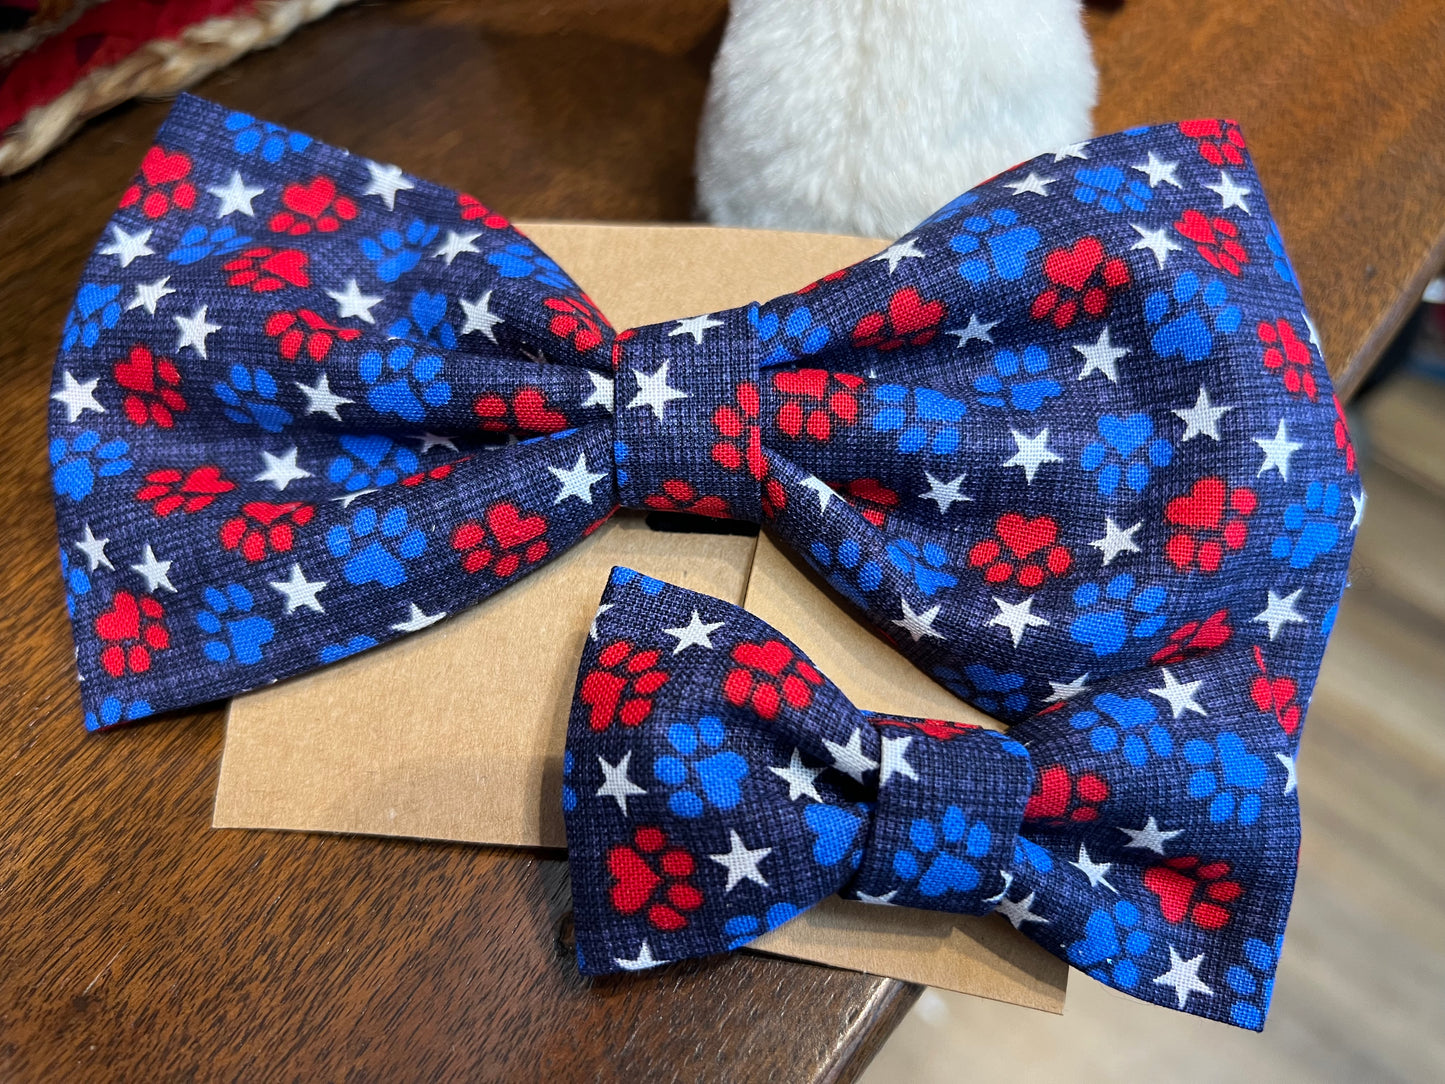 Alfred's Bows "Pawtriotic" Large Bow